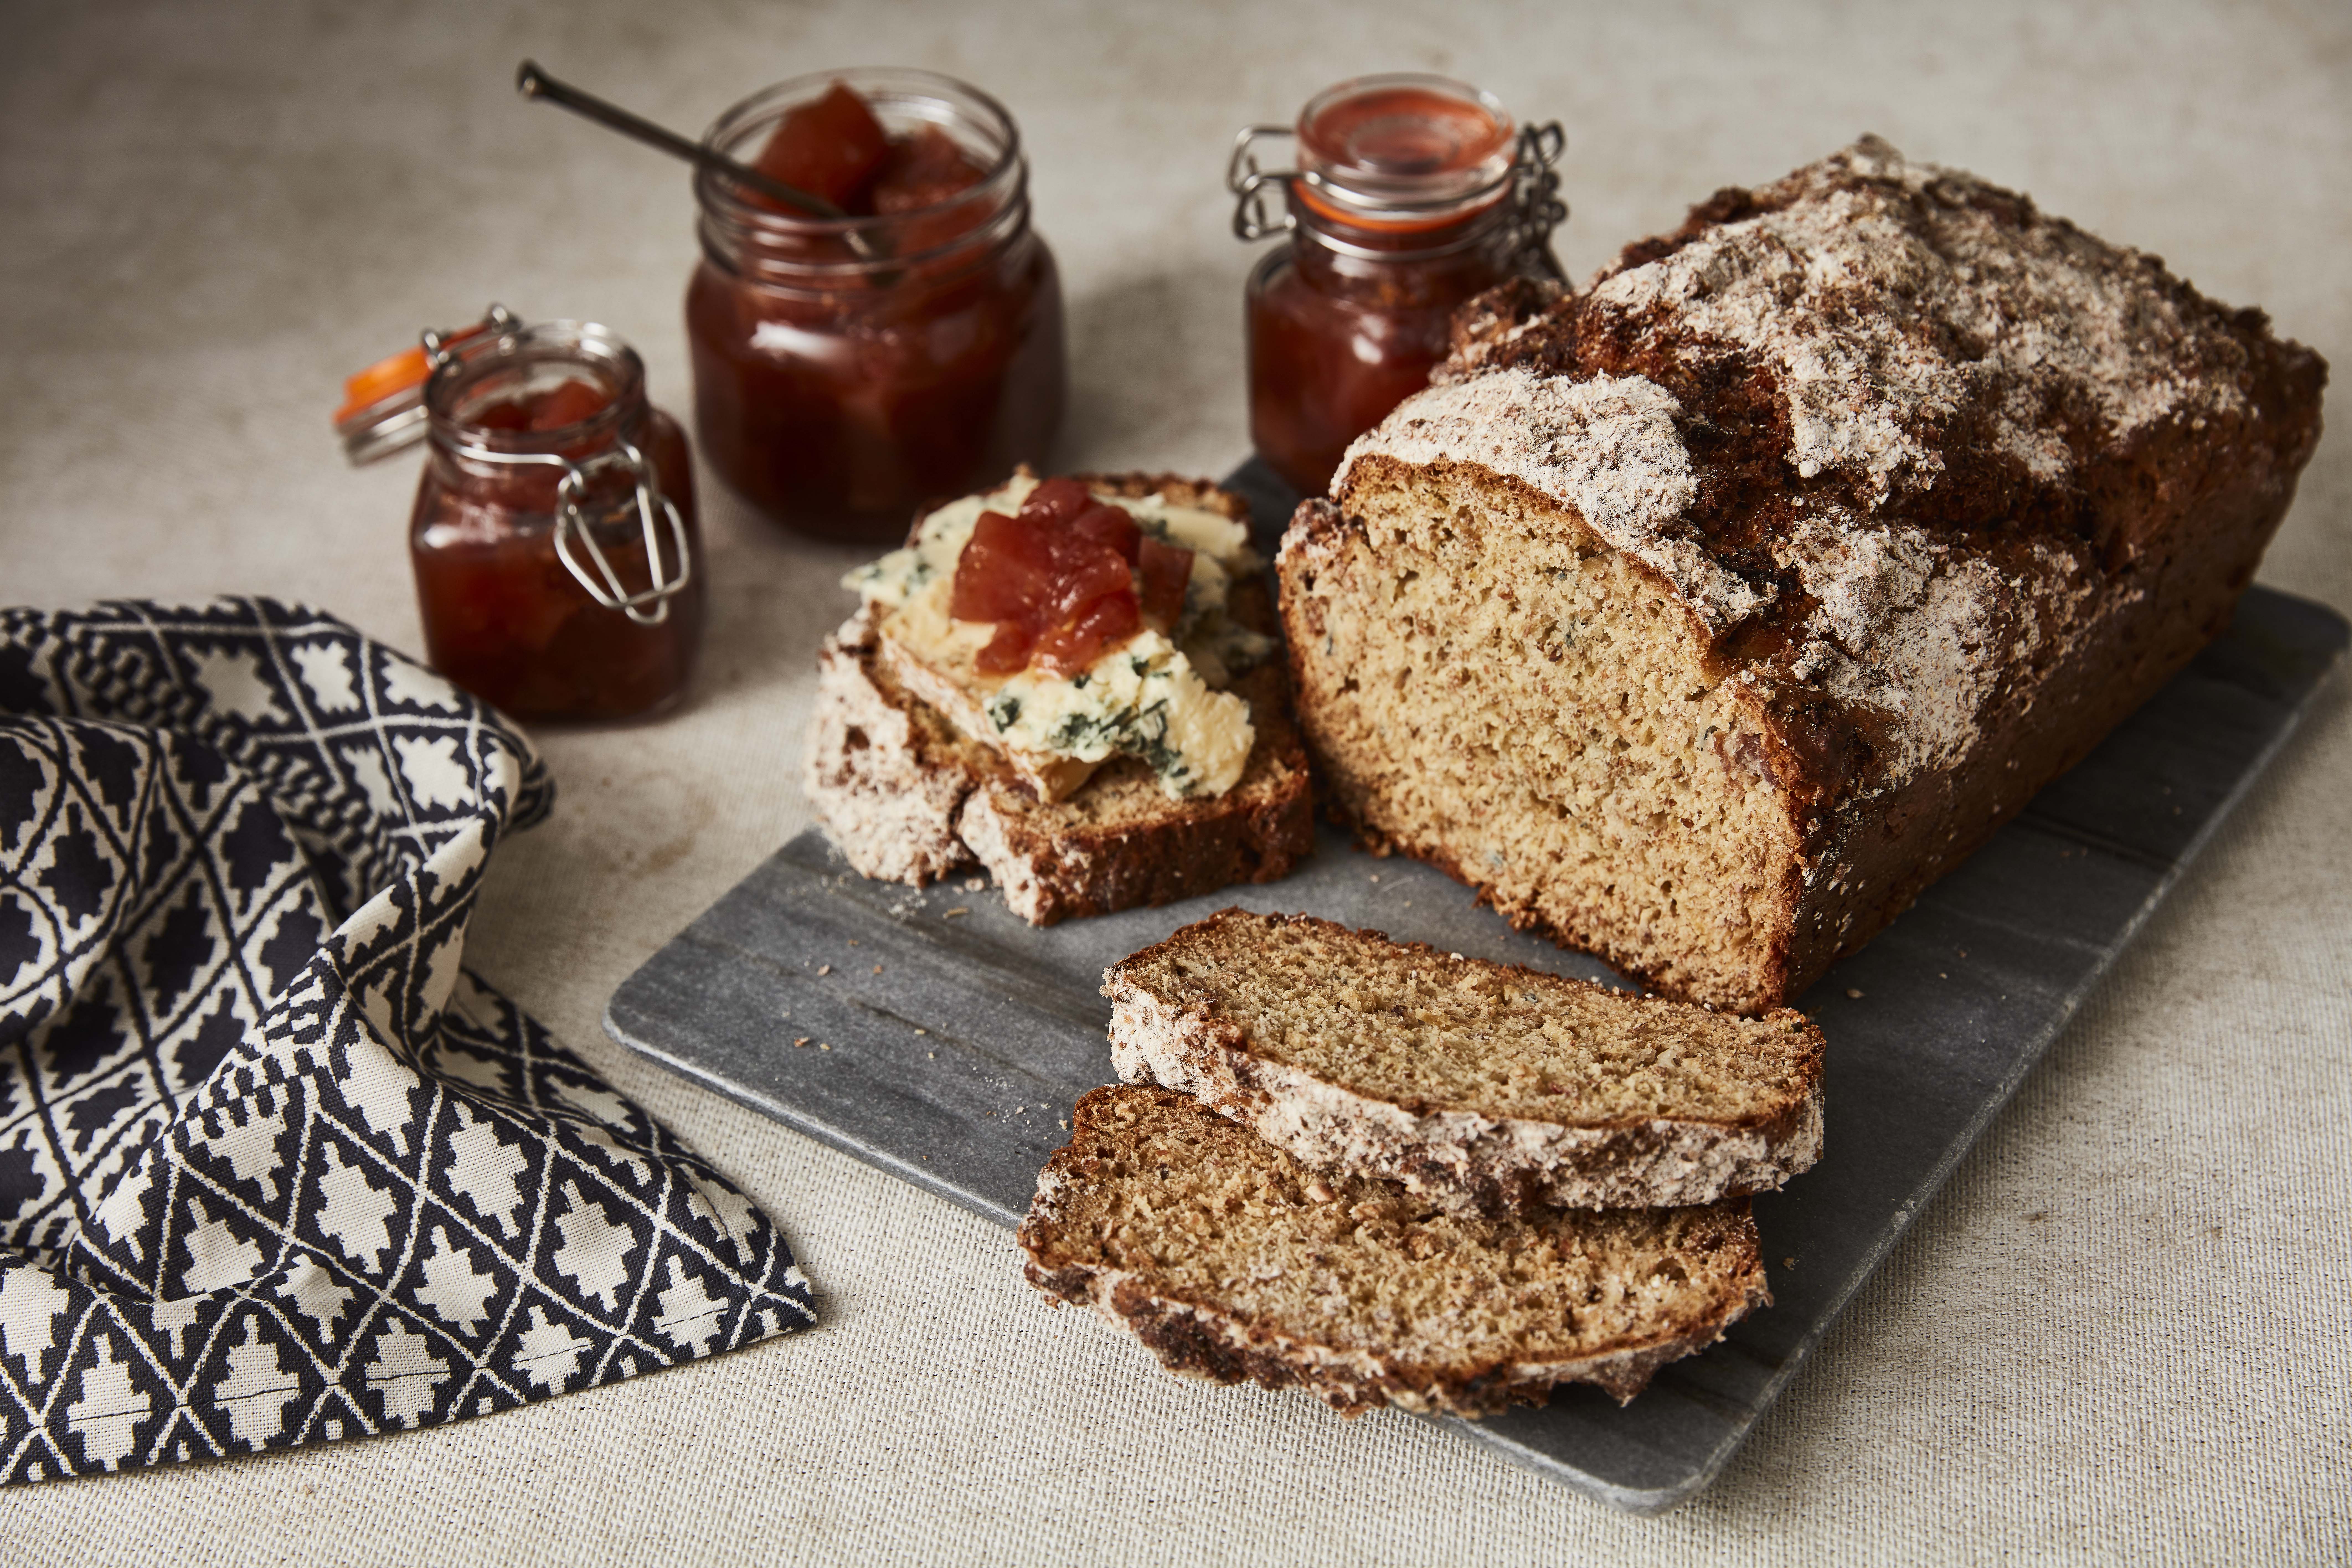 Pear, Blue cheese and Prosciutto Soda Bread sliced and served on a slate, with a jar of chutney